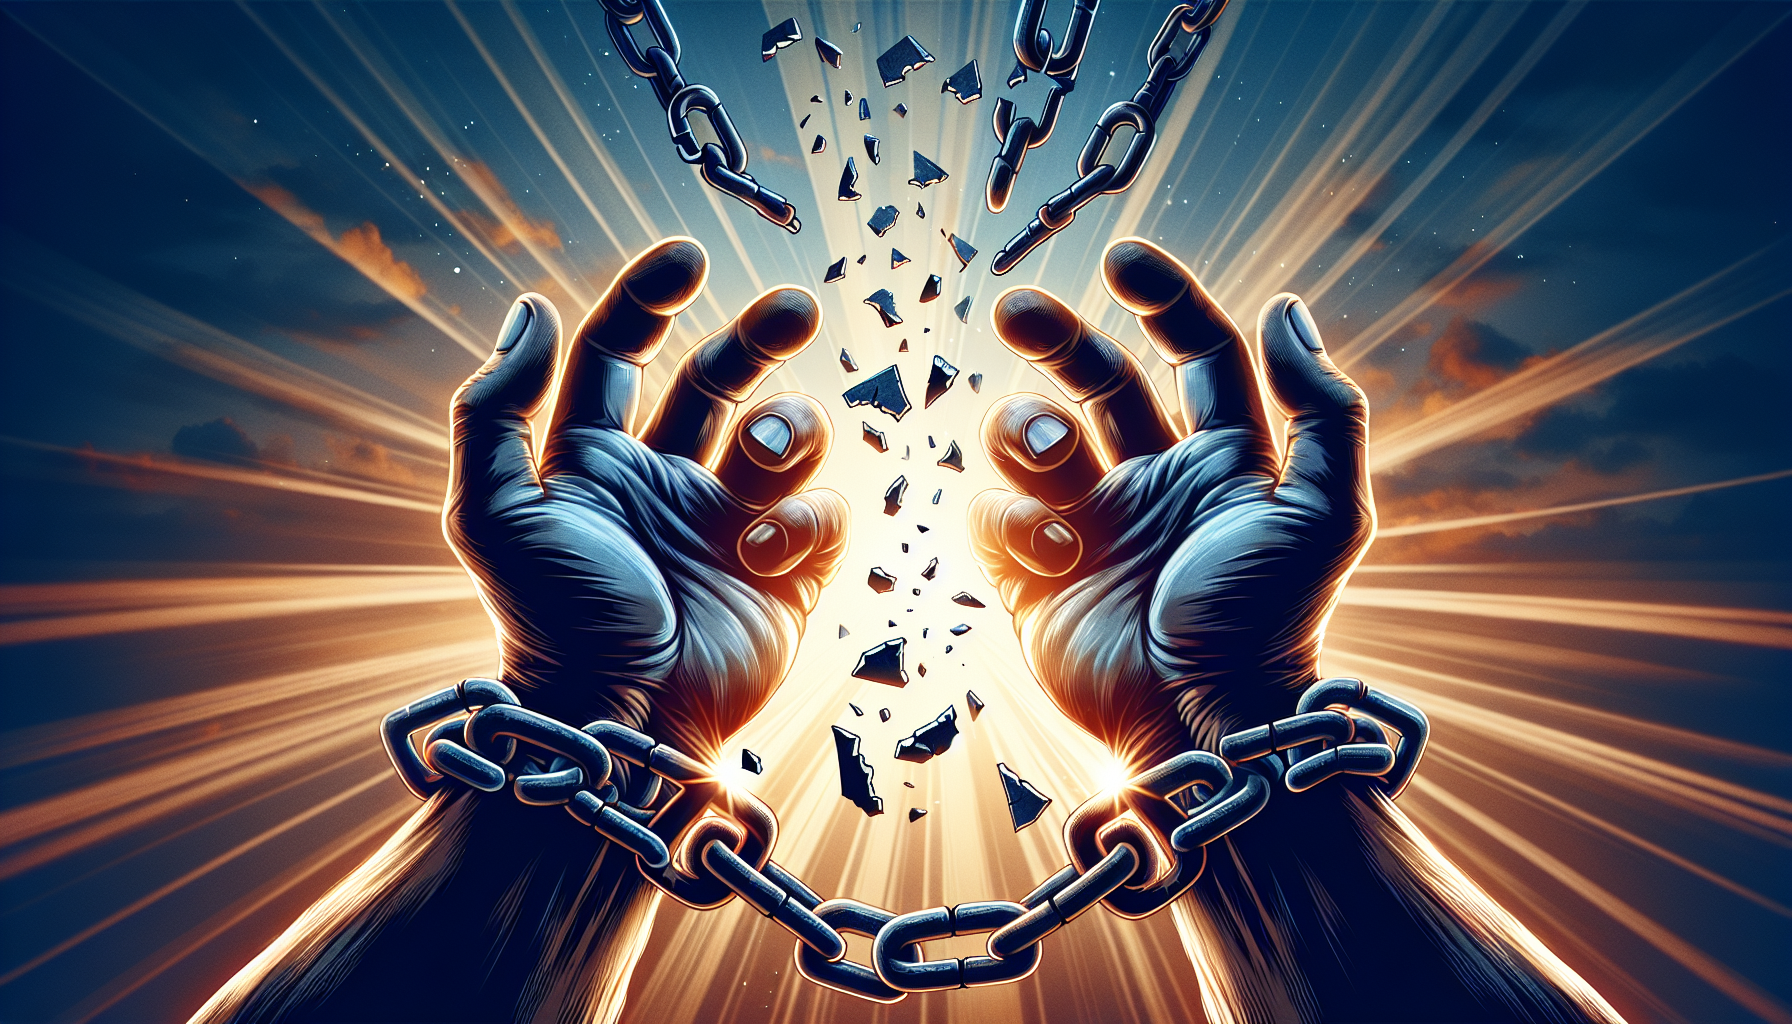 Illustration of breaking chains representing limiting beliefs